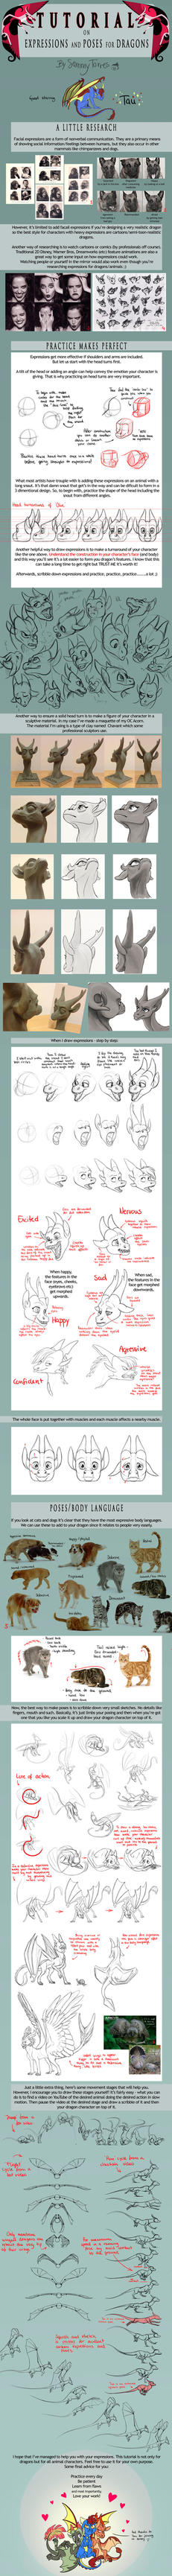 TUTORIAL: Expressions and Poses for Dragons by SammyTorres on DeviantArt